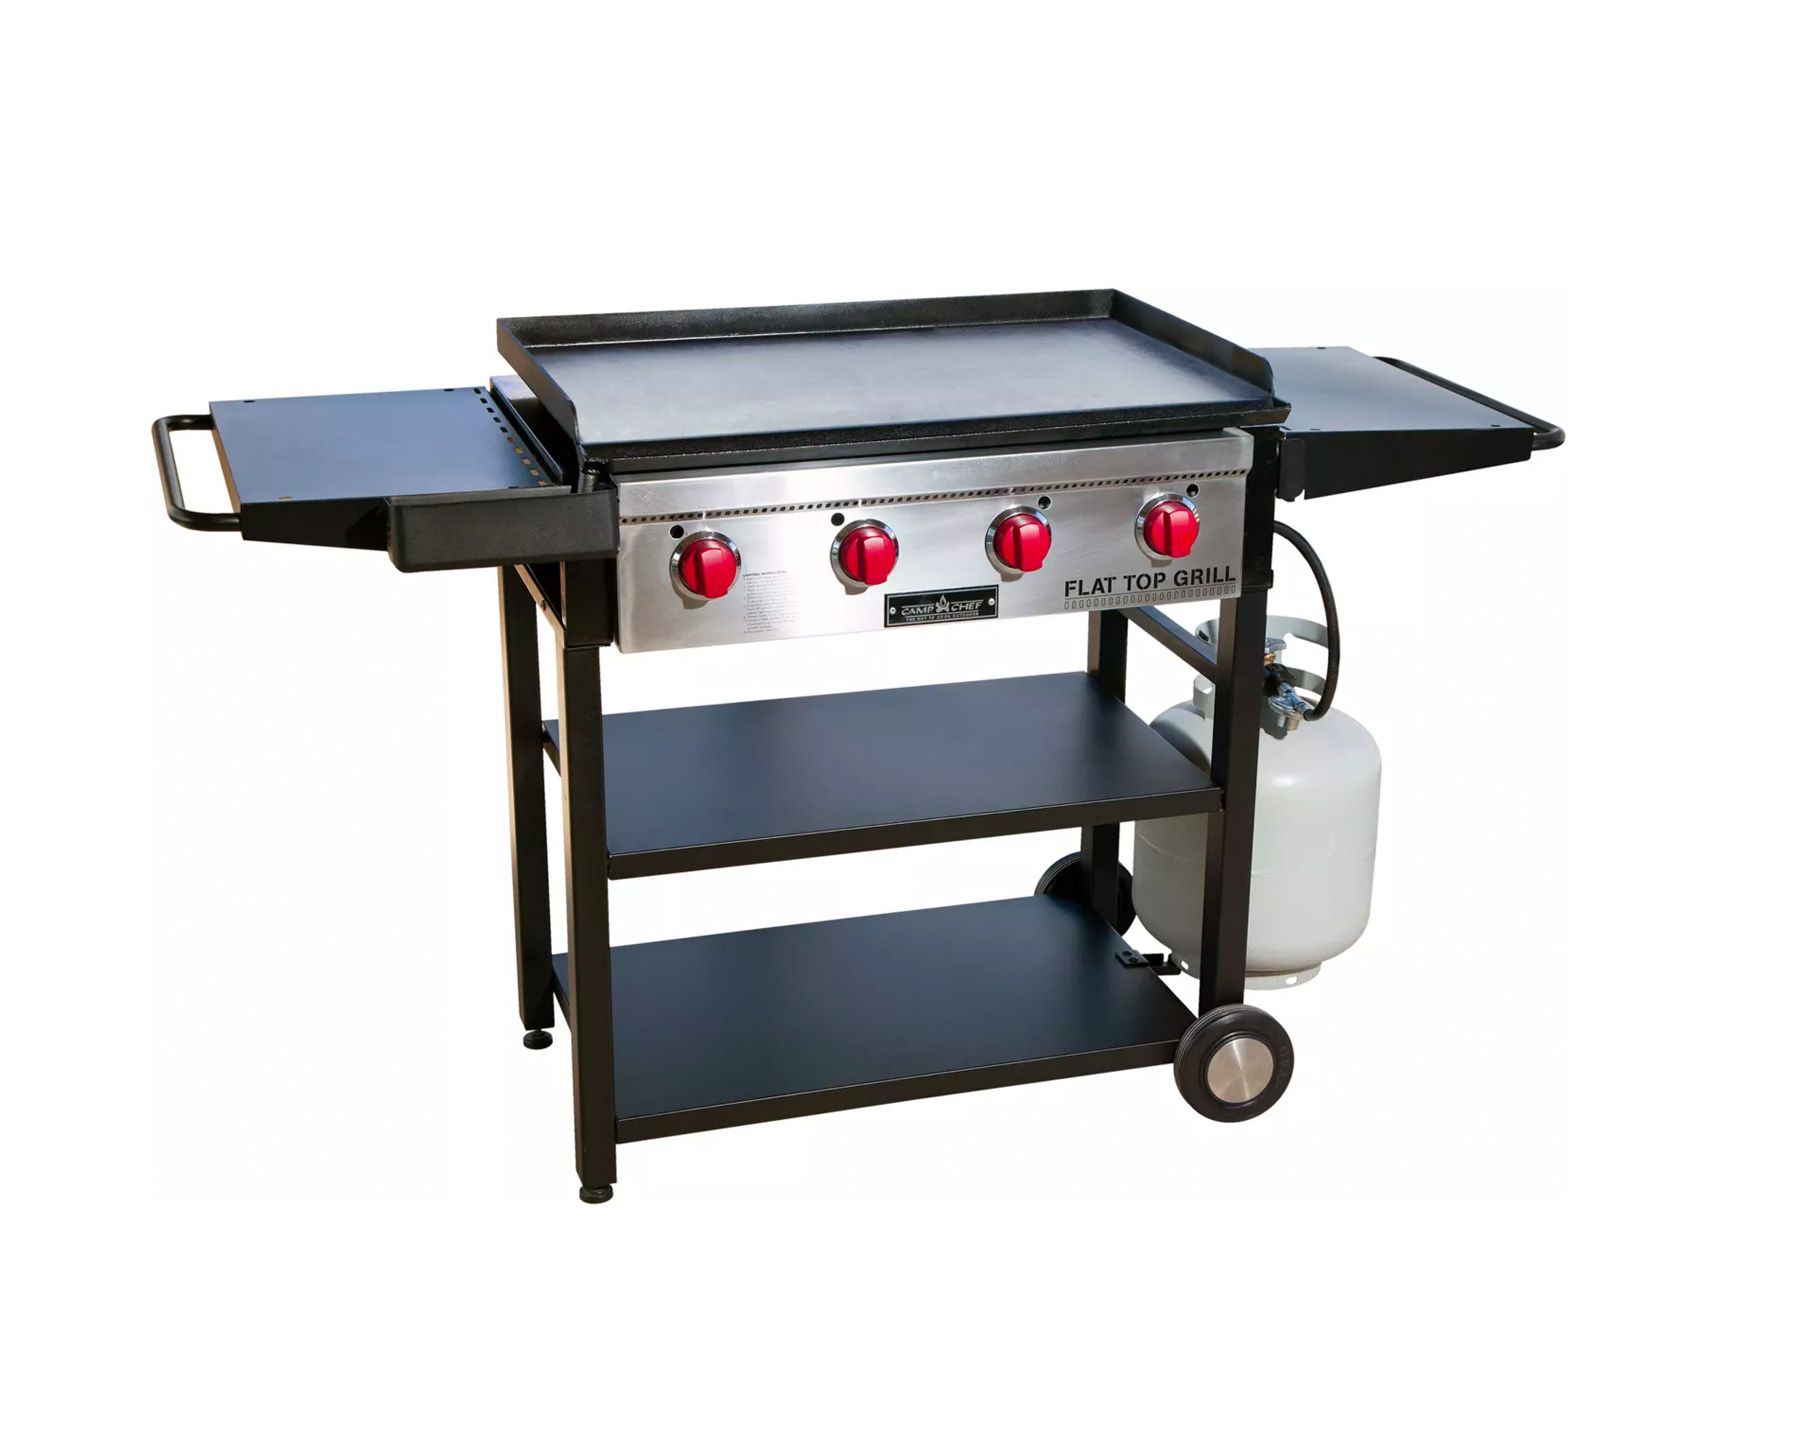 The 10 Best Flat Top Grills 2021, Large Round Flat Top Grill